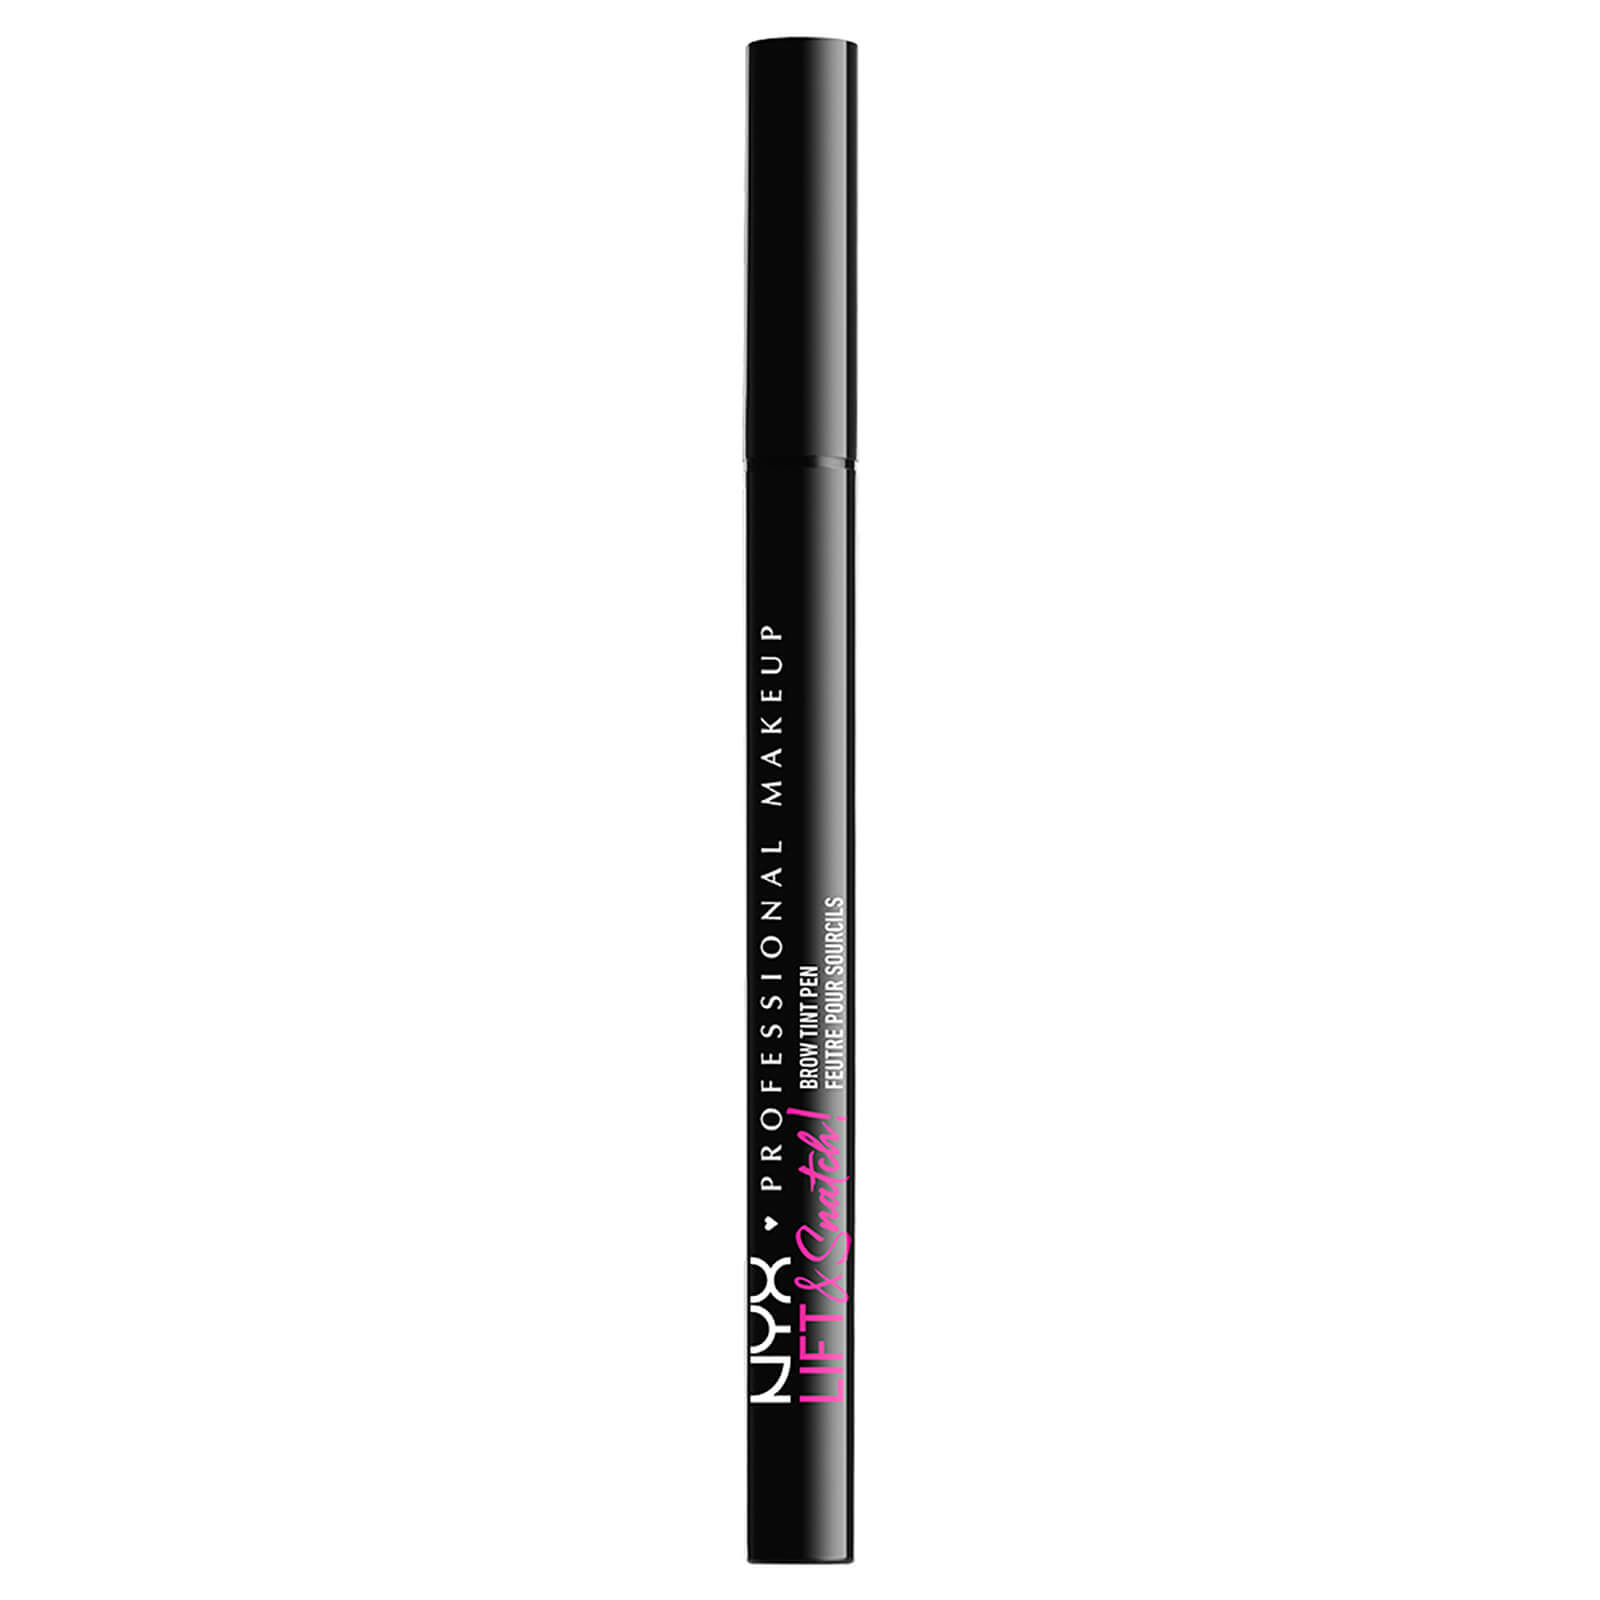 NYX Professional Makeup Lift and Snatch Brow Tint Pen 3g (Various Shades) - Black